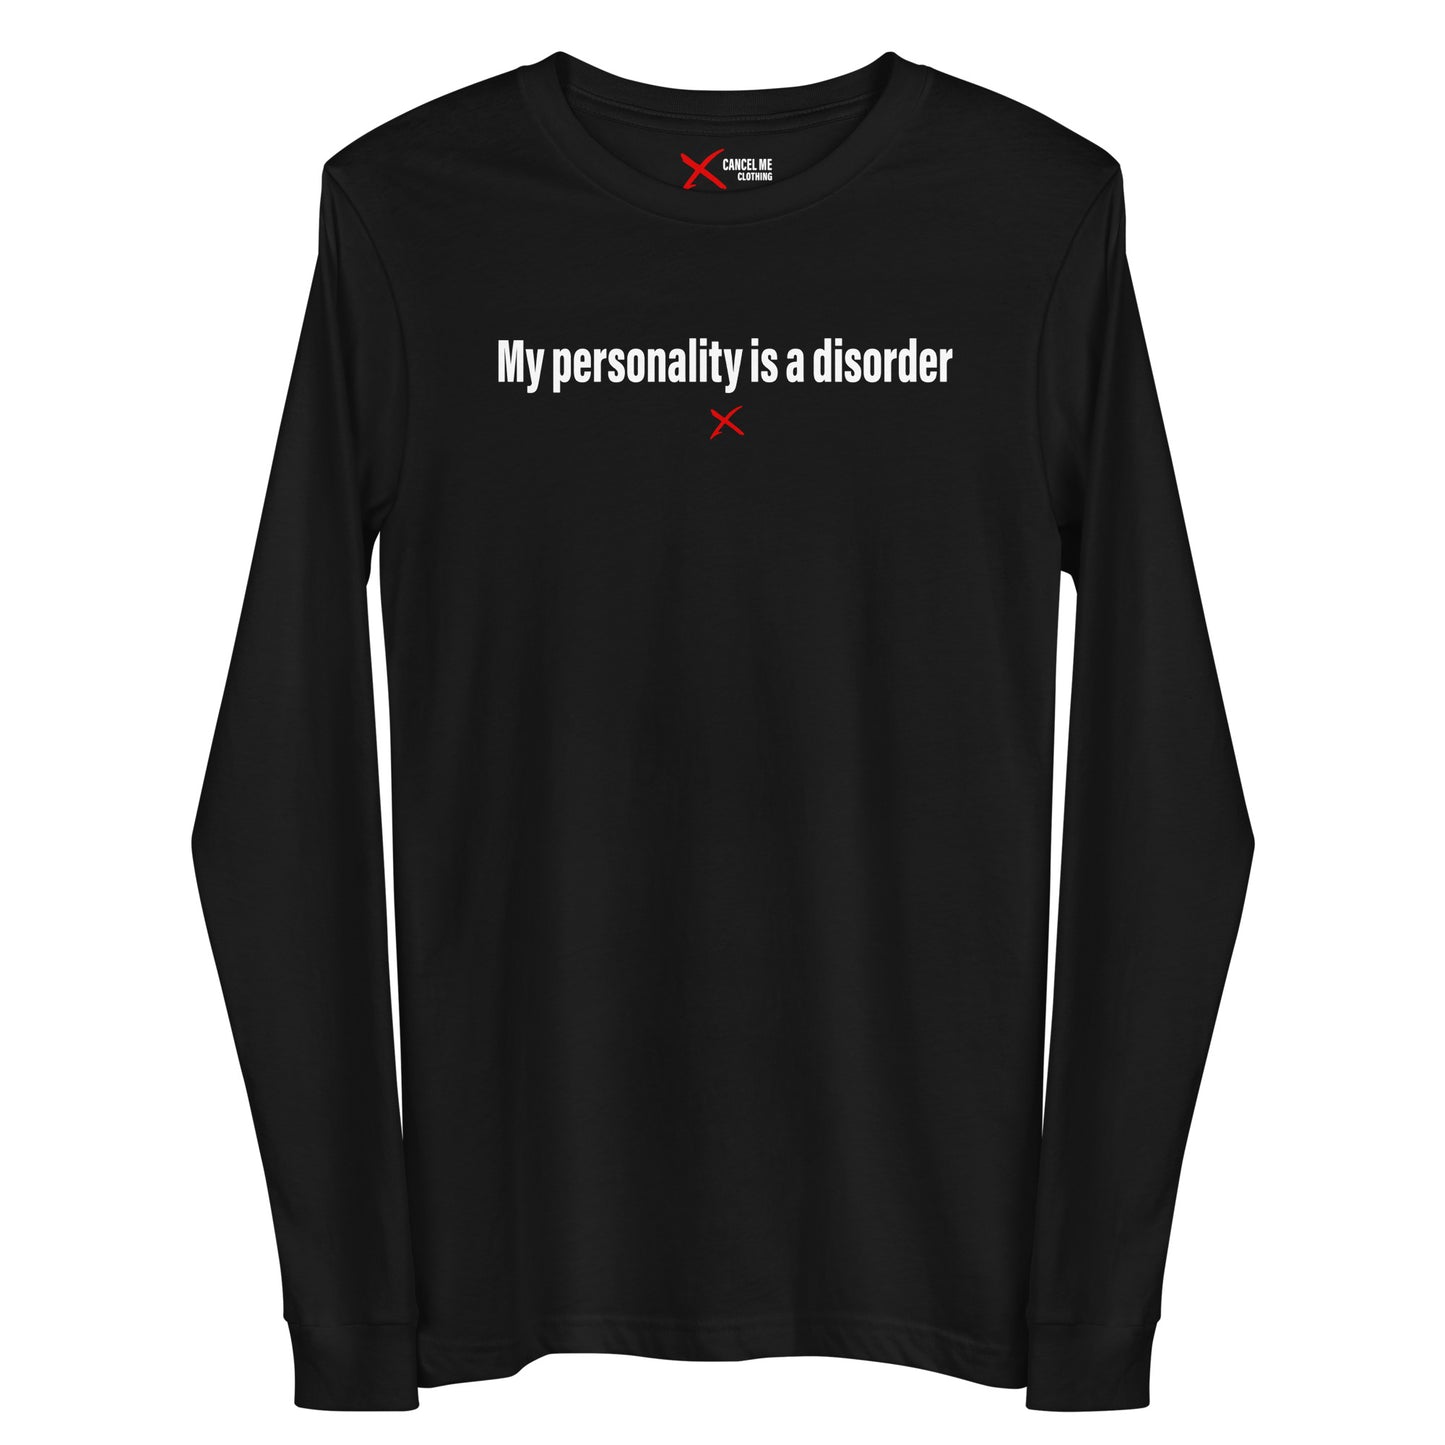 My personality is a disorder - Longsleeve